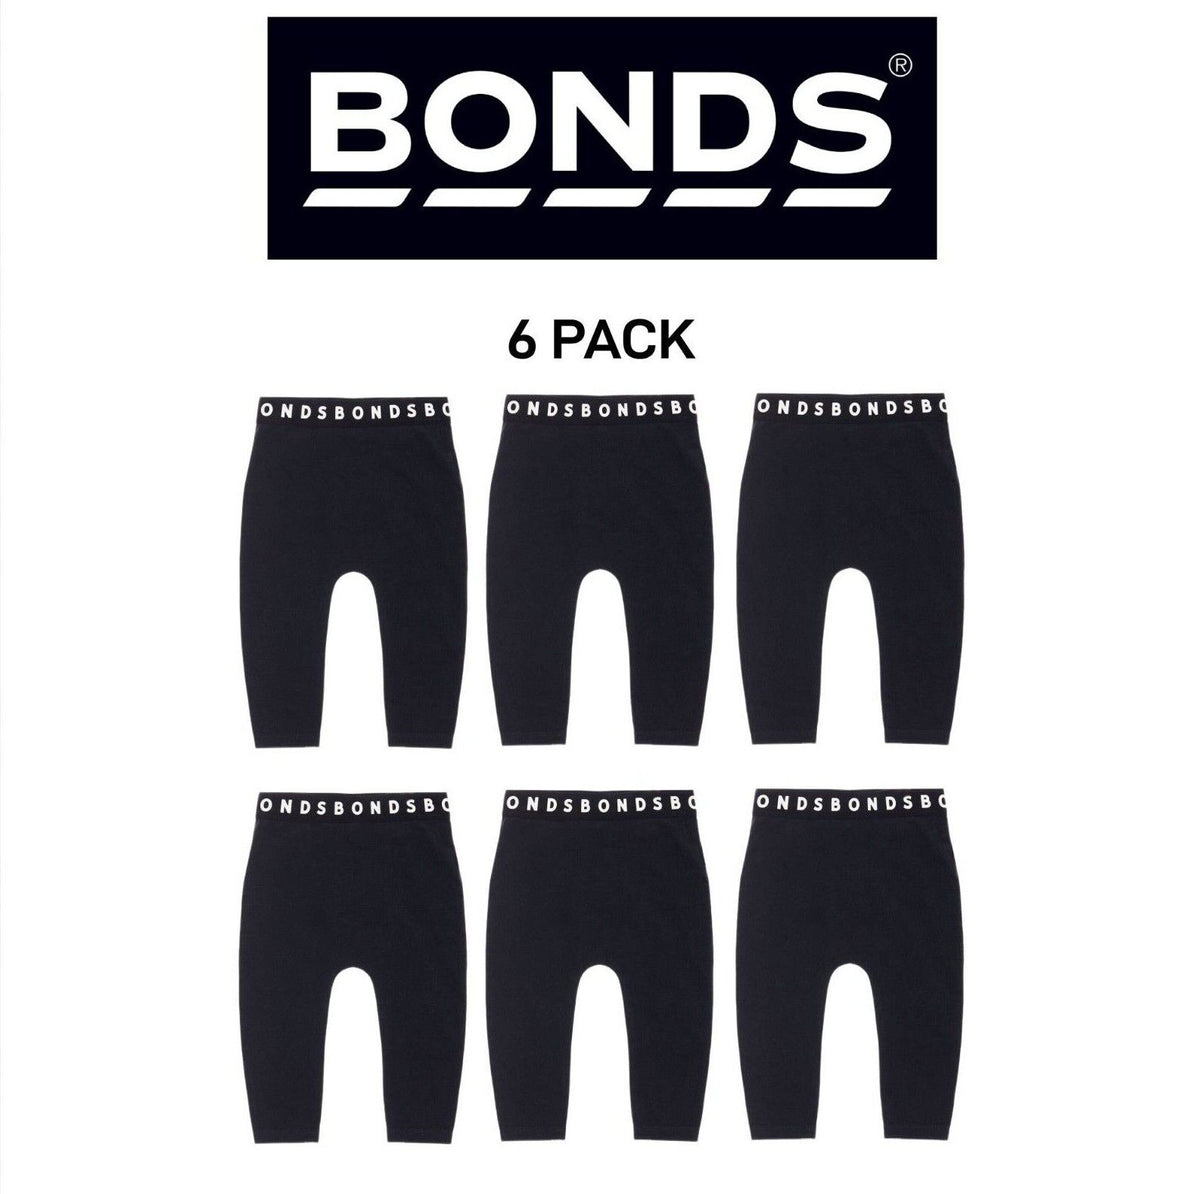 Bonds Baby Stretchies Legging Super Soft & Stretchable Comfortable 6 Pack BXF8A